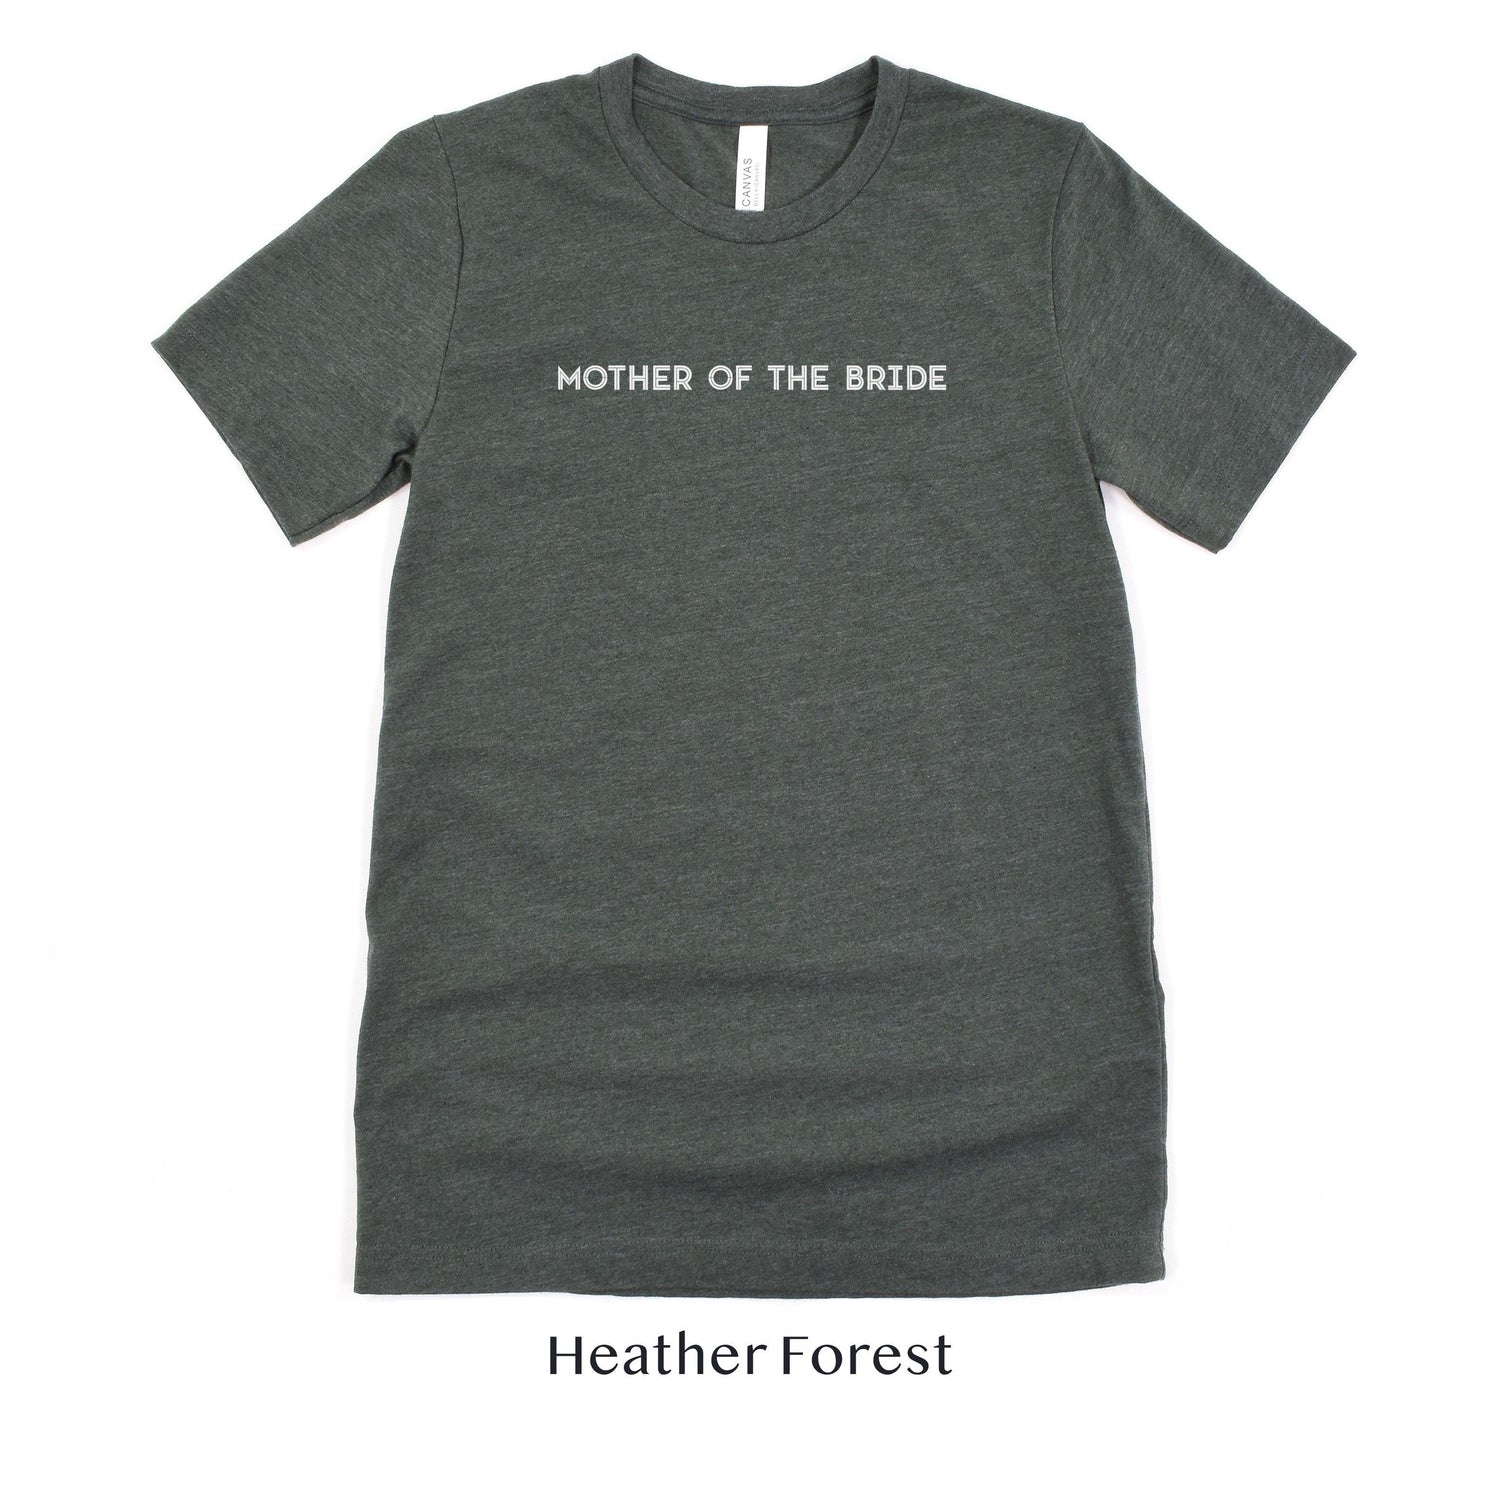 Mother of the Bride Shirt - Matching Wedding Party tshirts - Unisex t-shirt by Oaklynn Lane